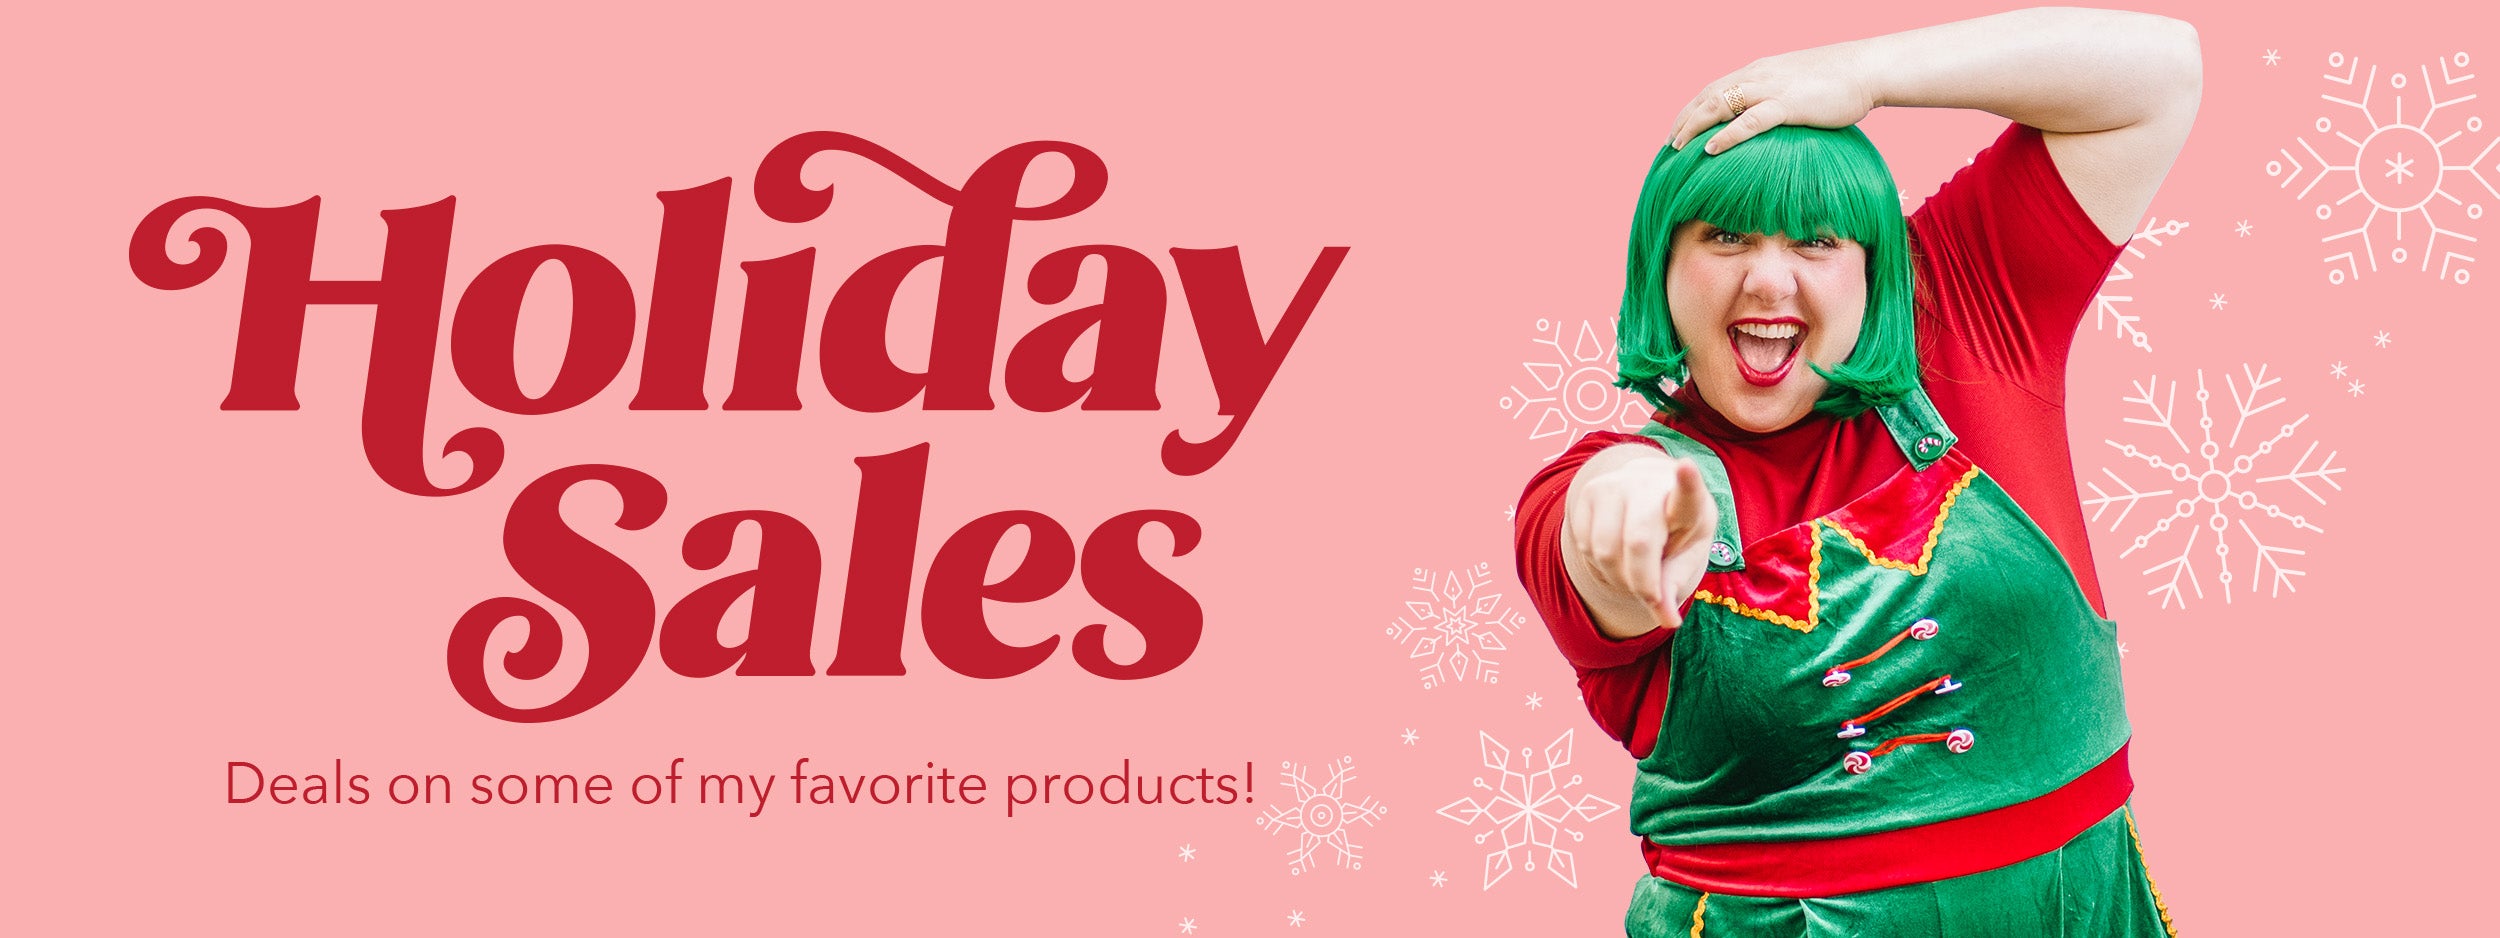 Holiday Sales - Deals on some of my favorite products!